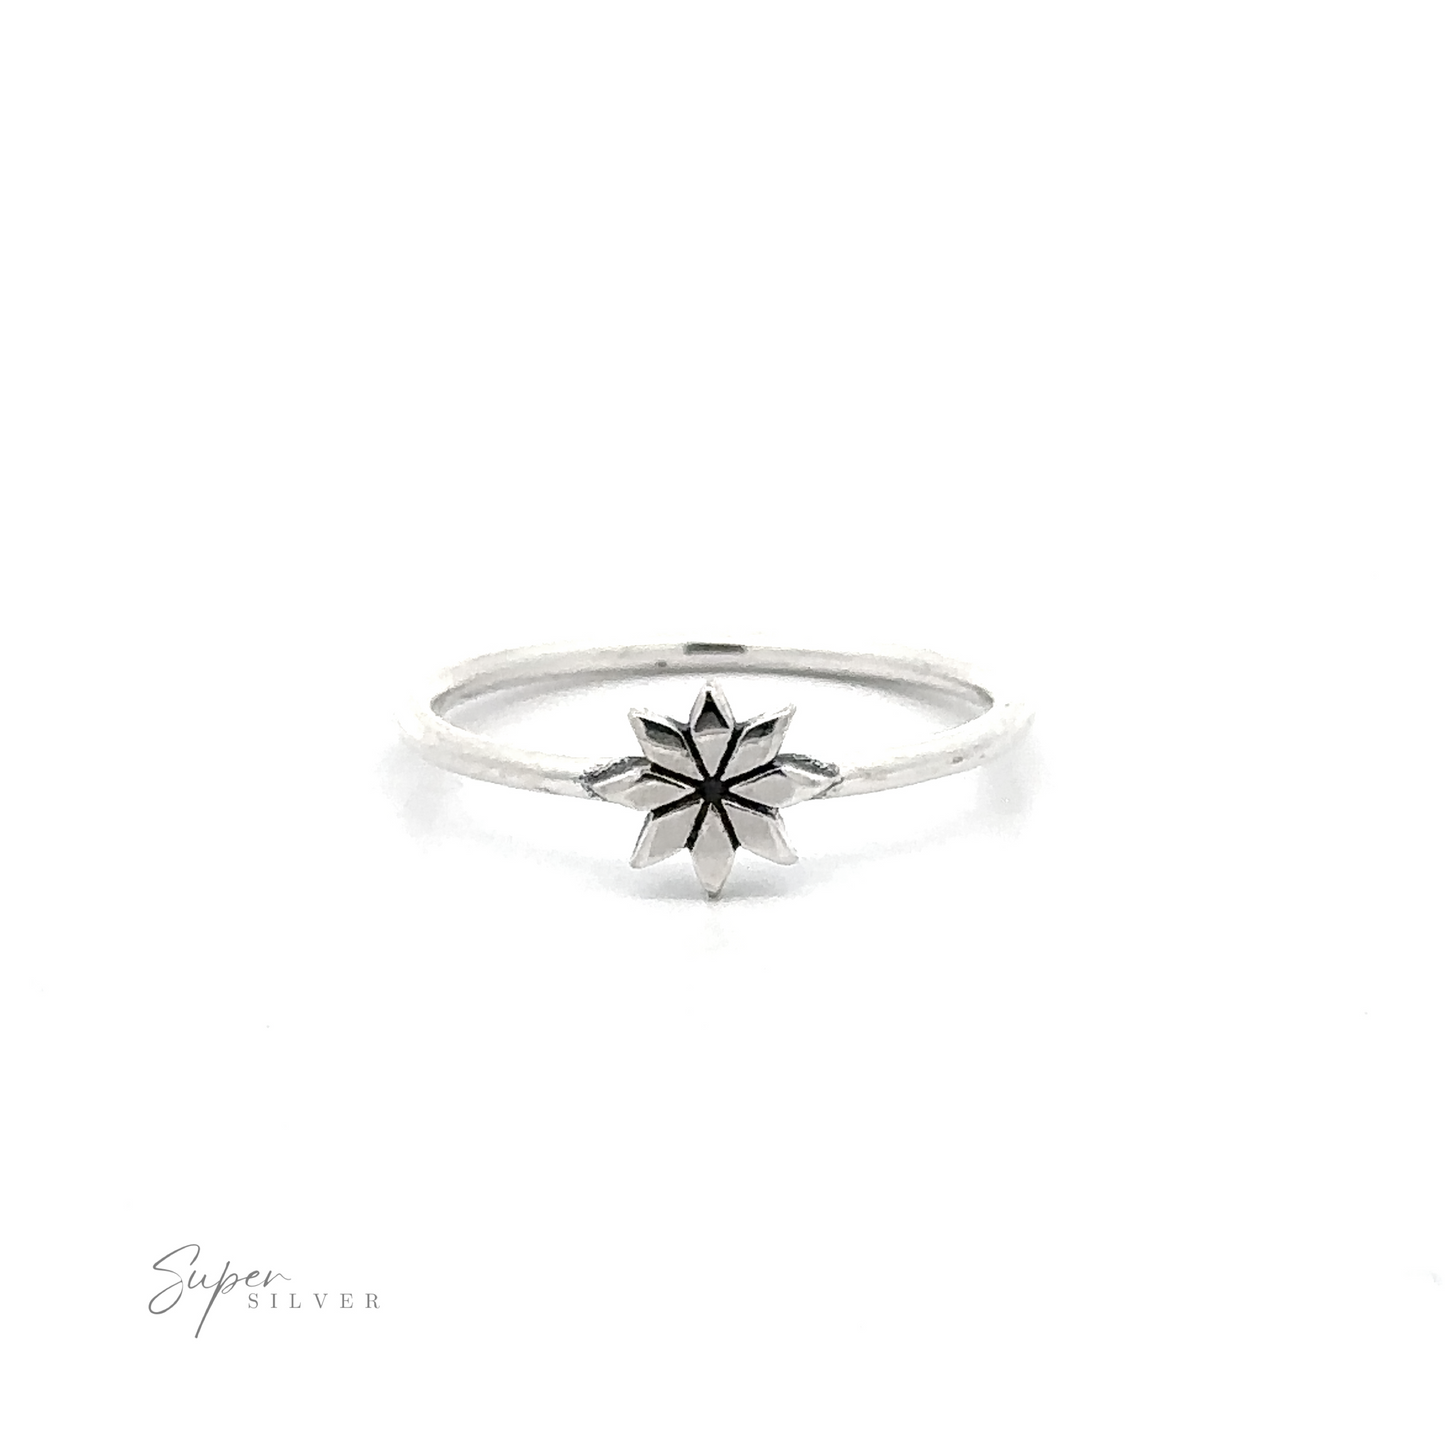 A Geometric Flower Ring with a star-shaped design displayed on a white background.